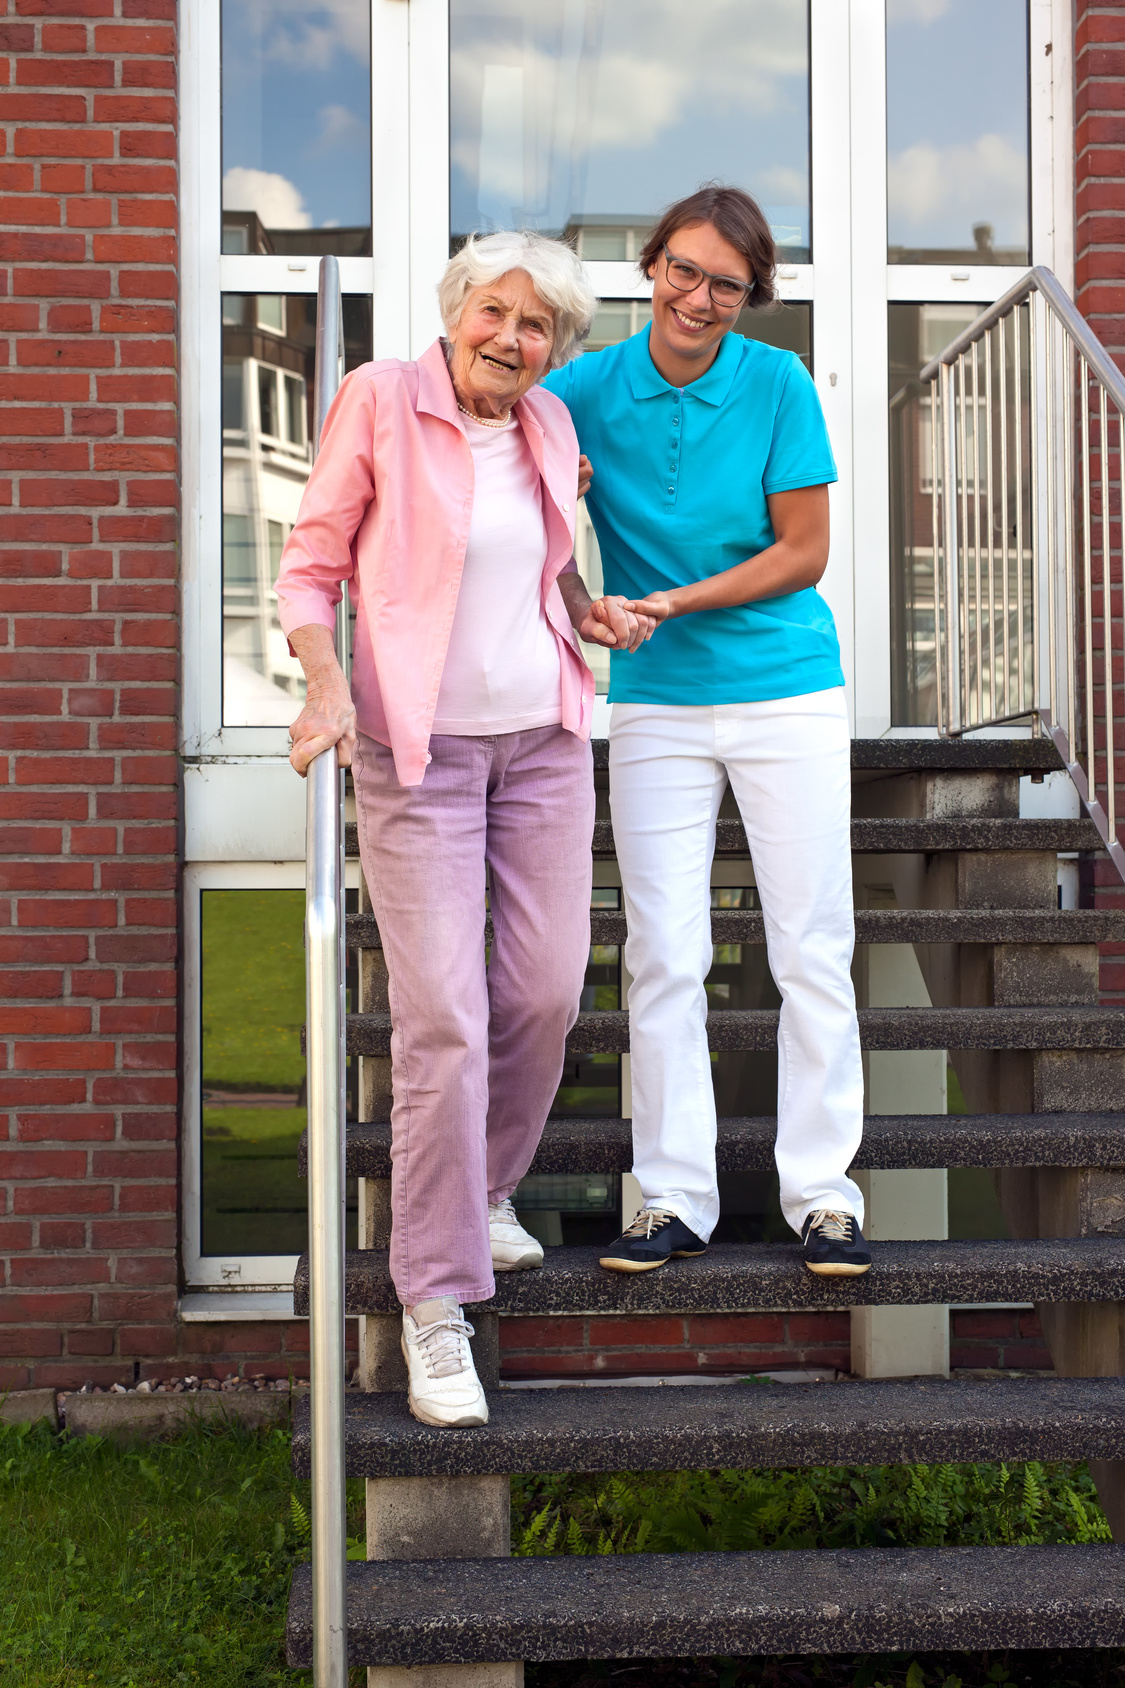 Elderly Fall Prevention Services in Brookfield, Pewaukee, Elm Grove, WI